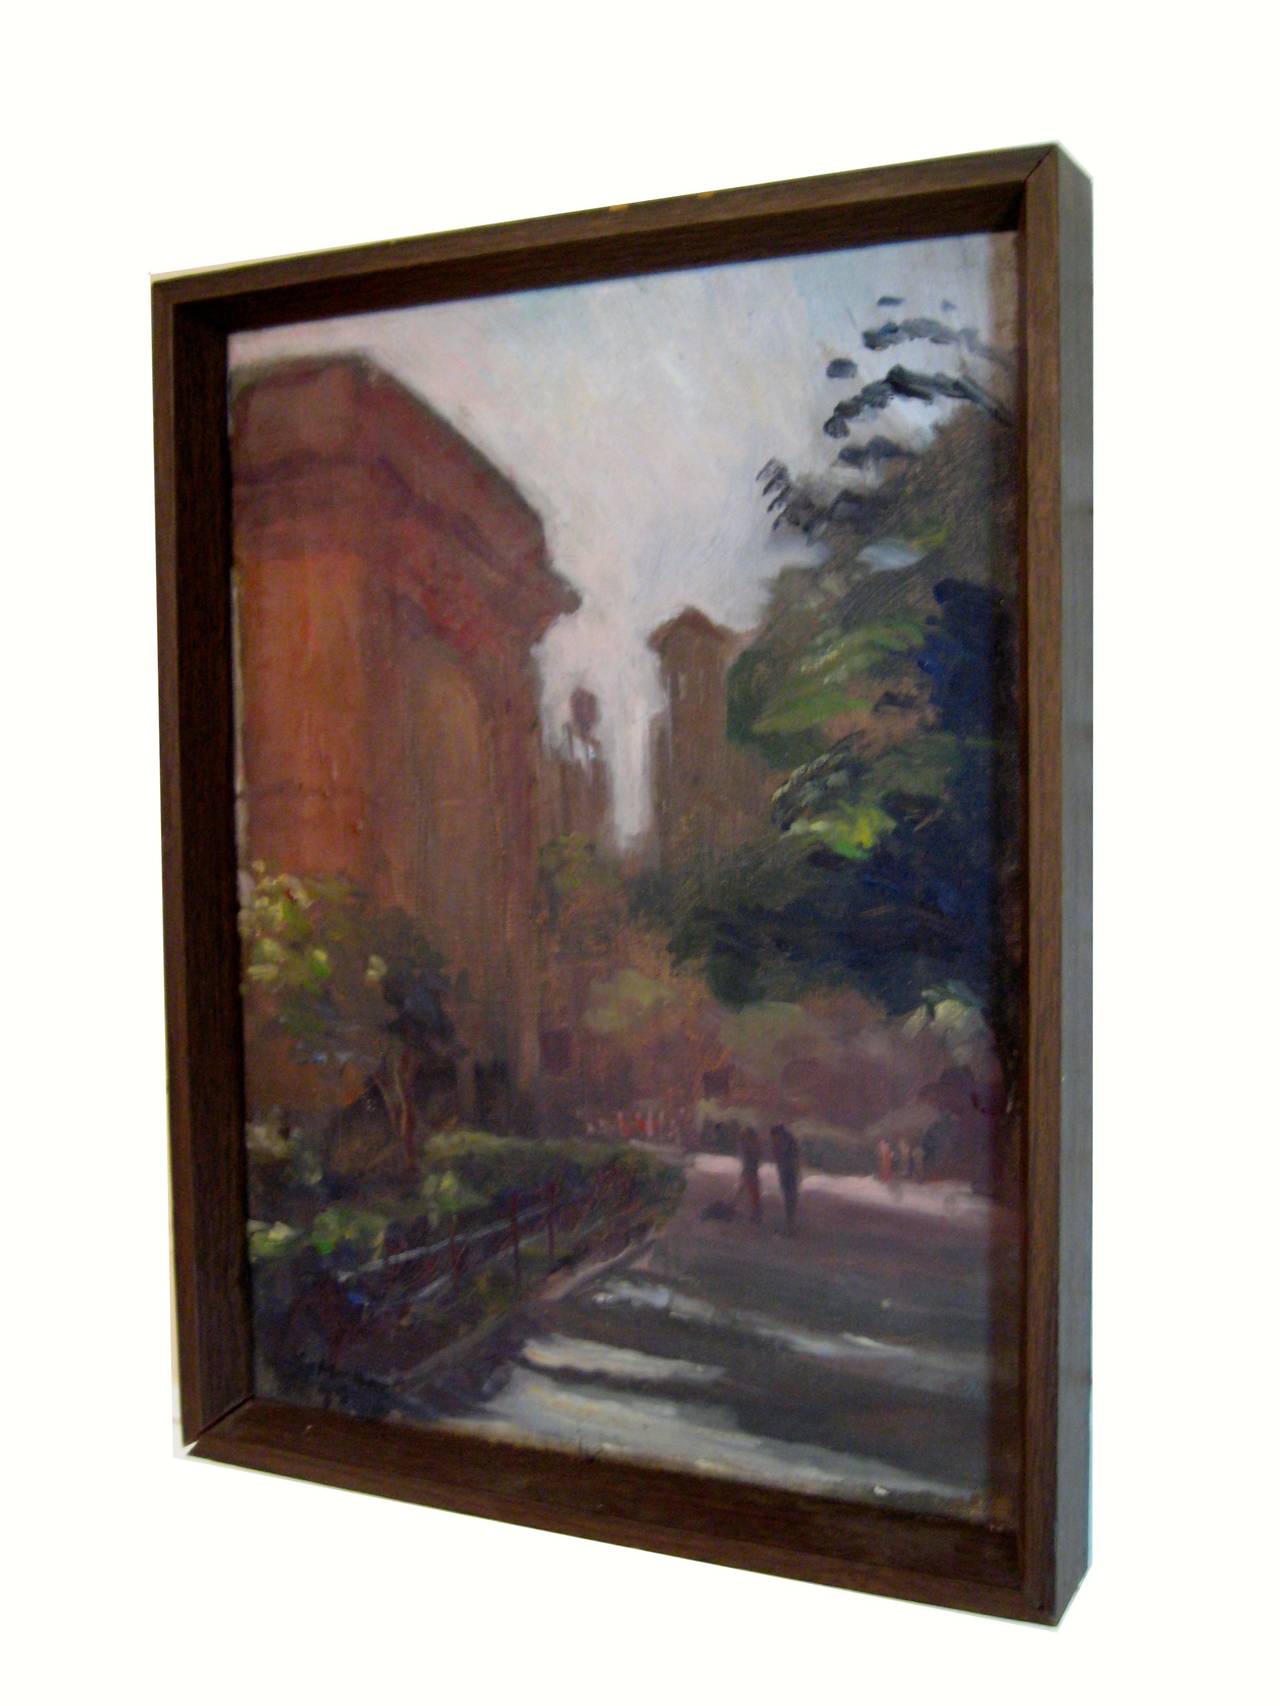 Painted by New York artist, Anthony Springer (1928-1995). Springer most famous for his New York scenes has rendered a wonderfully peaceful moment in a normally bustling Washington Square park. Signed lower left, Springer and dated either 1977 or